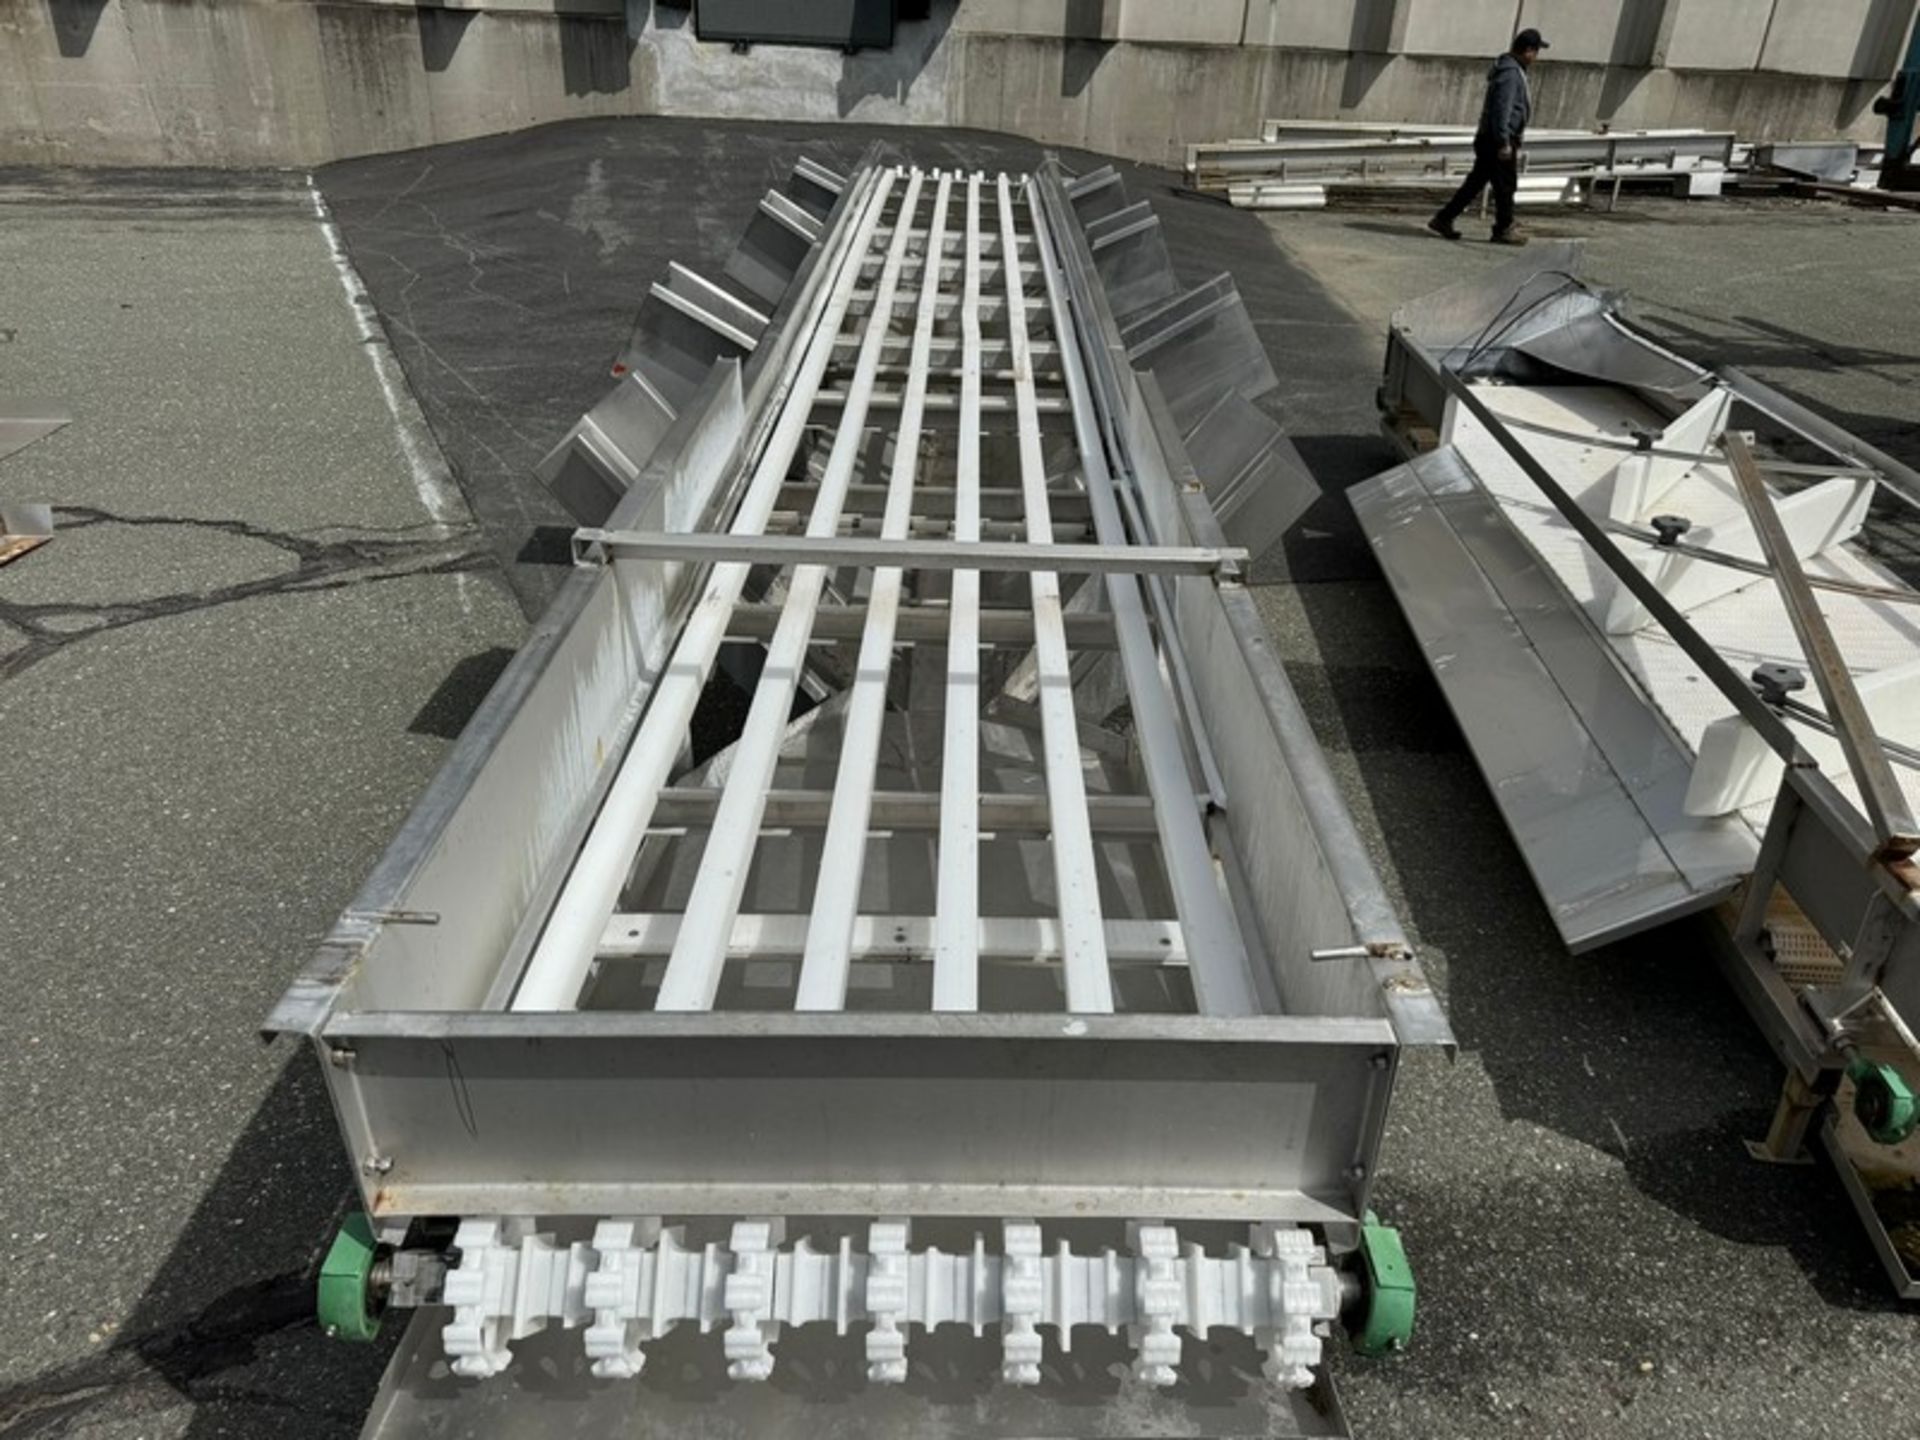 Straight Section of Conveyor - Image 3 of 5